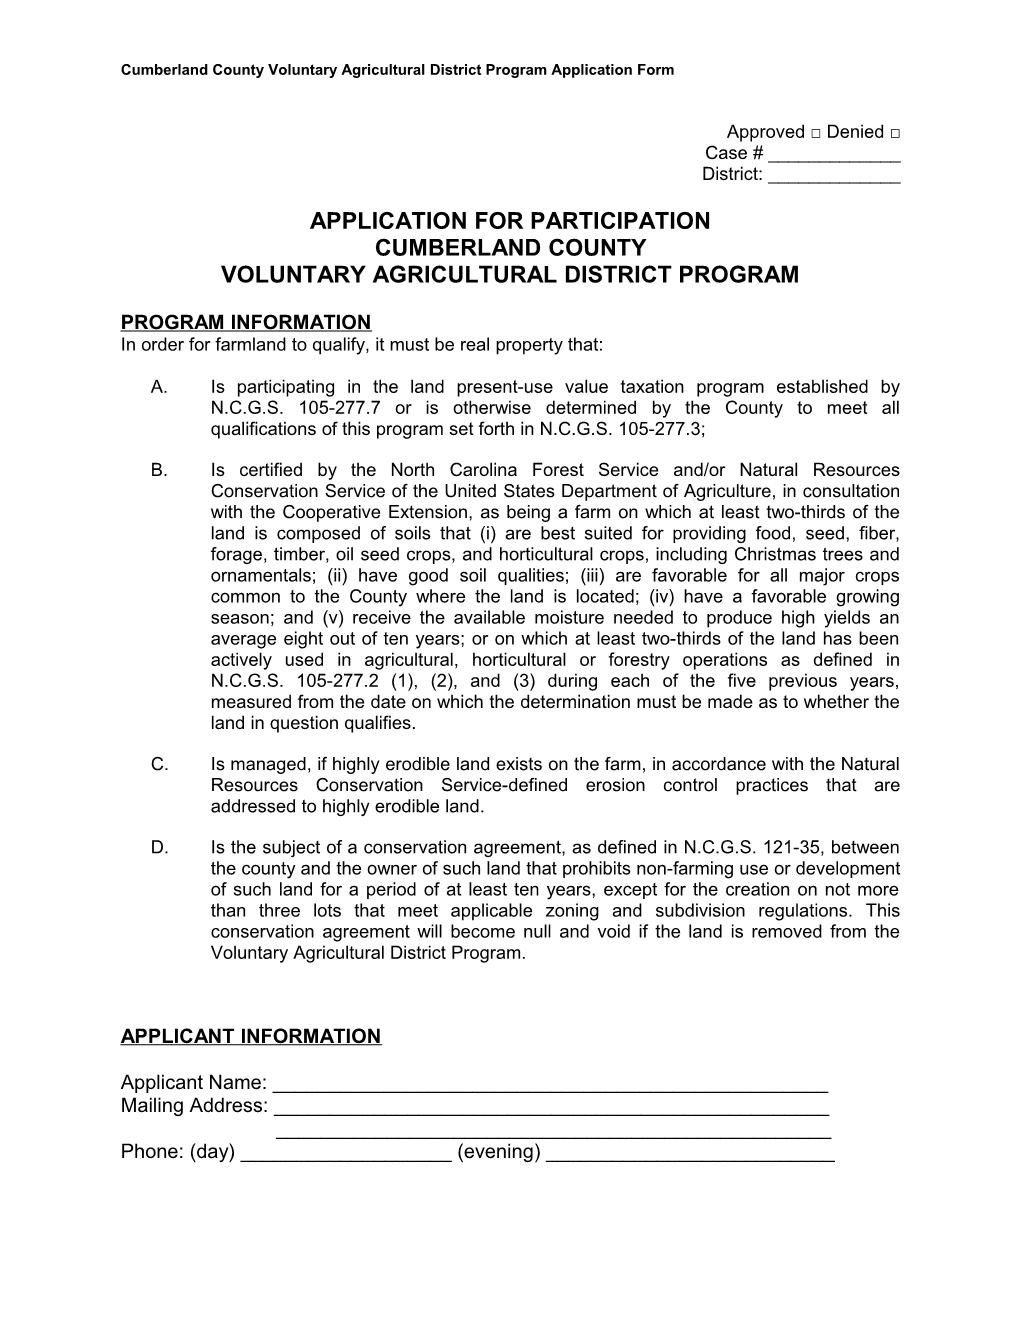 Cumberlandcounty Voluntary Agricultural District Program Application Form